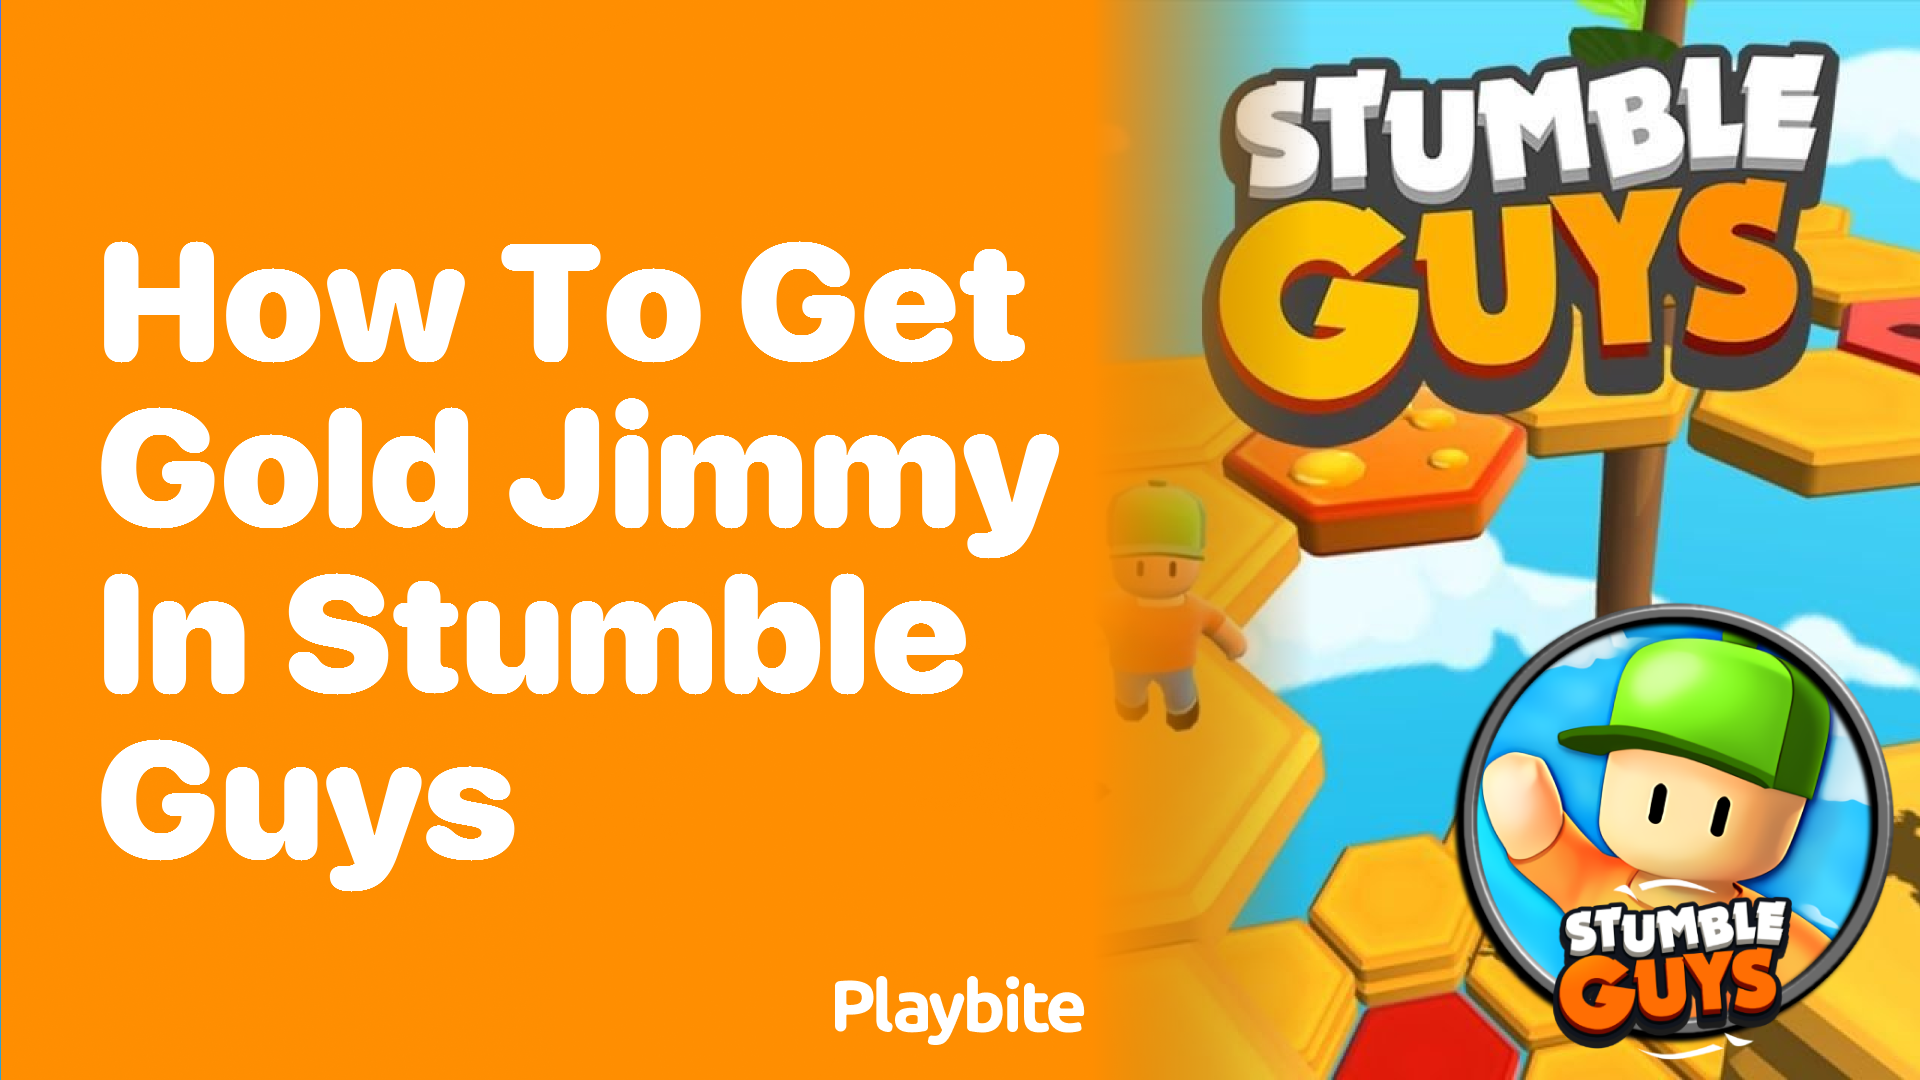 How to Get Gold Jimmy in Stumble Guys